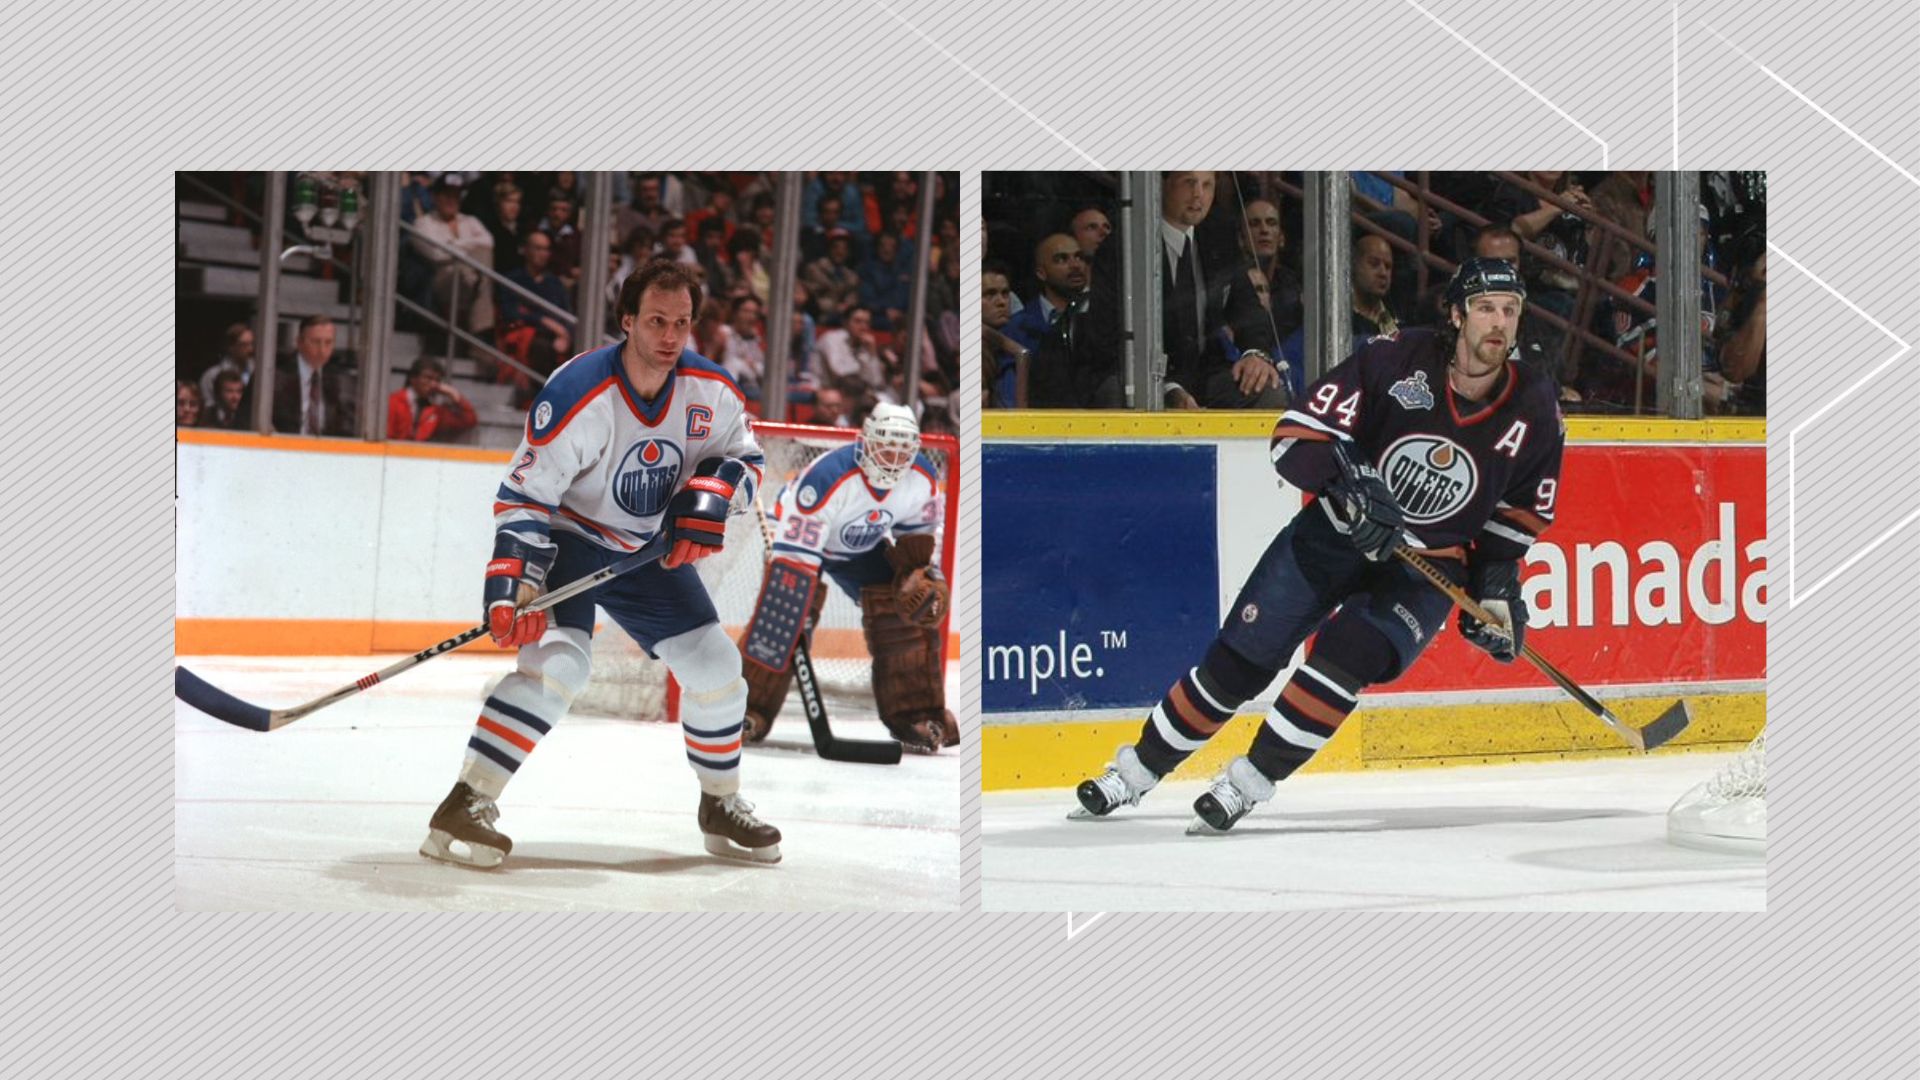 Ryan Smyth and Lee Fogolin Called to Edmonton Oilers Hall of Fame -  OilersNation